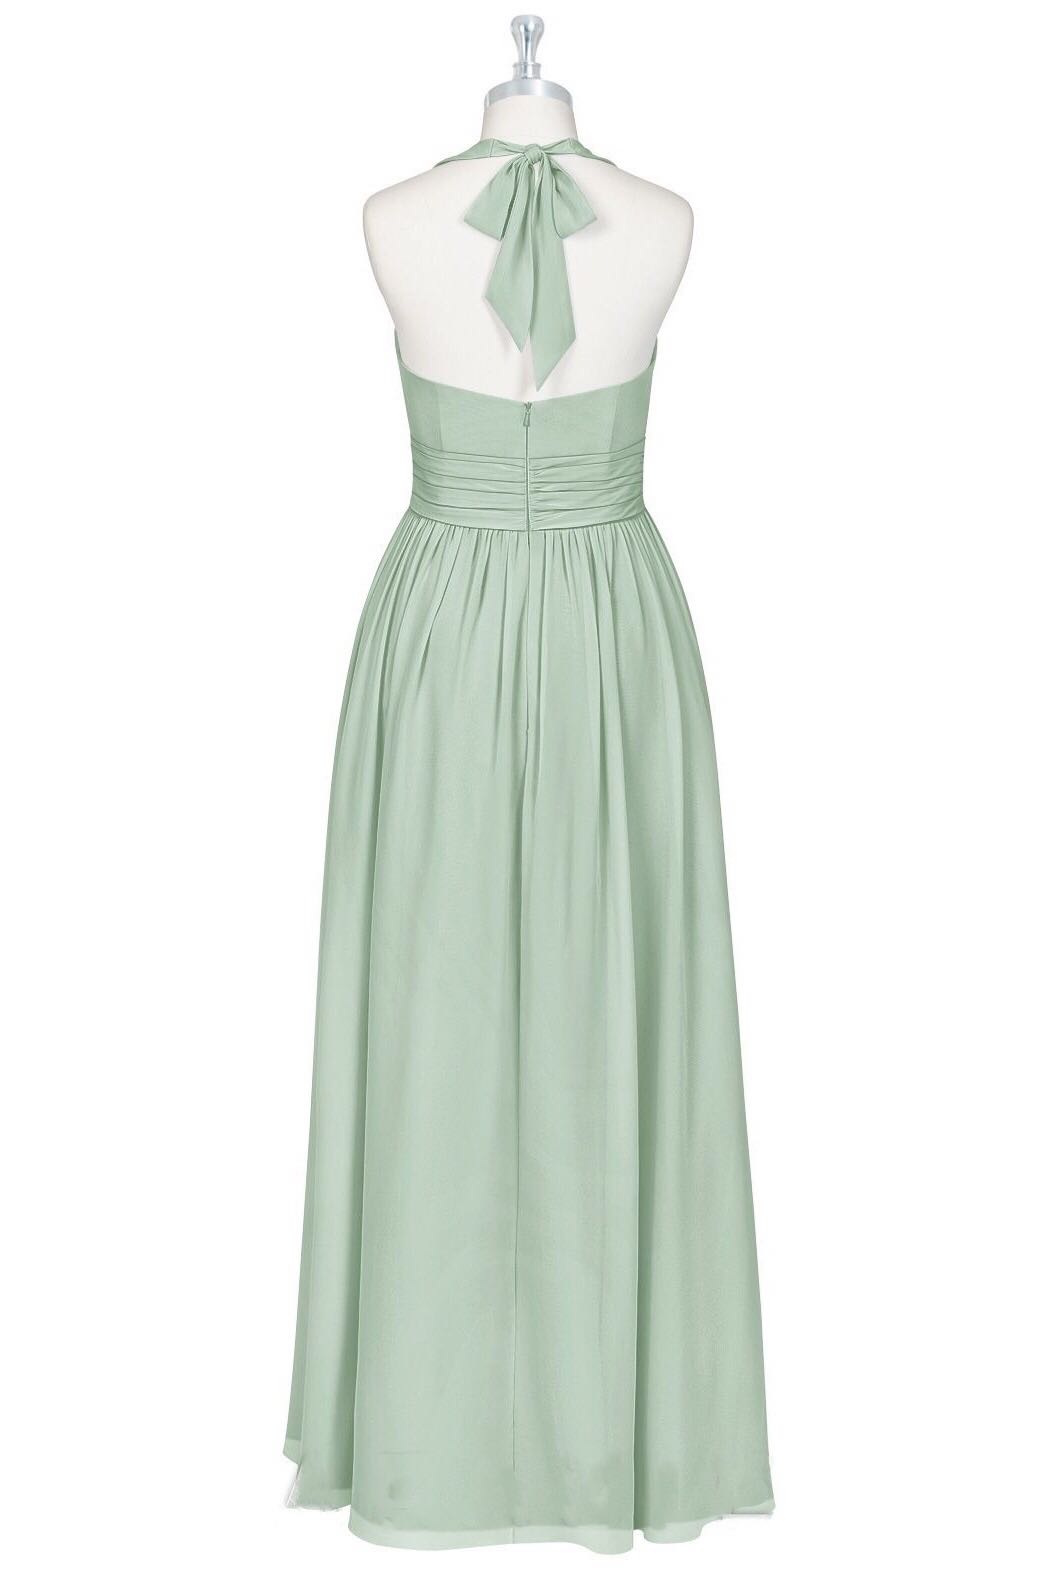 Dusty Sage Halter Bow Tie Pleated Long Bridesmaid Dress with Slit